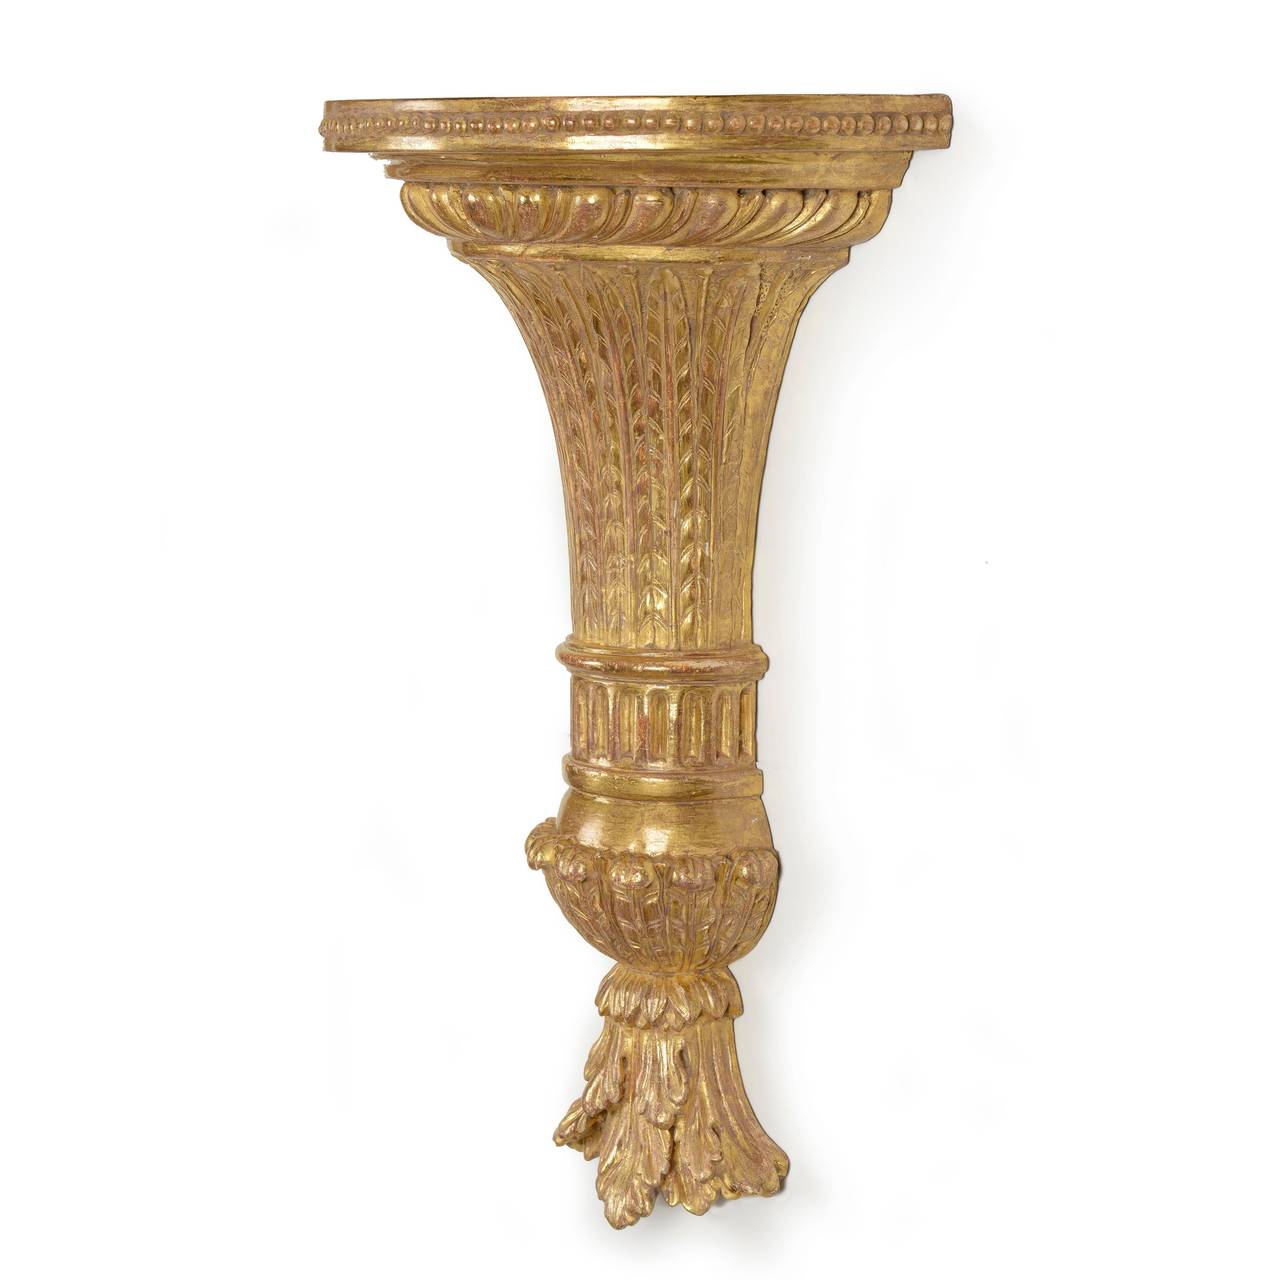 A fine pair of George III carved giltwood wall brackets, of demilune form. The platform top with beaded frieze over a gadrooned neck supported by a leaf carved, curved, tapering central section with double collared fluted ankles, with leaf car and